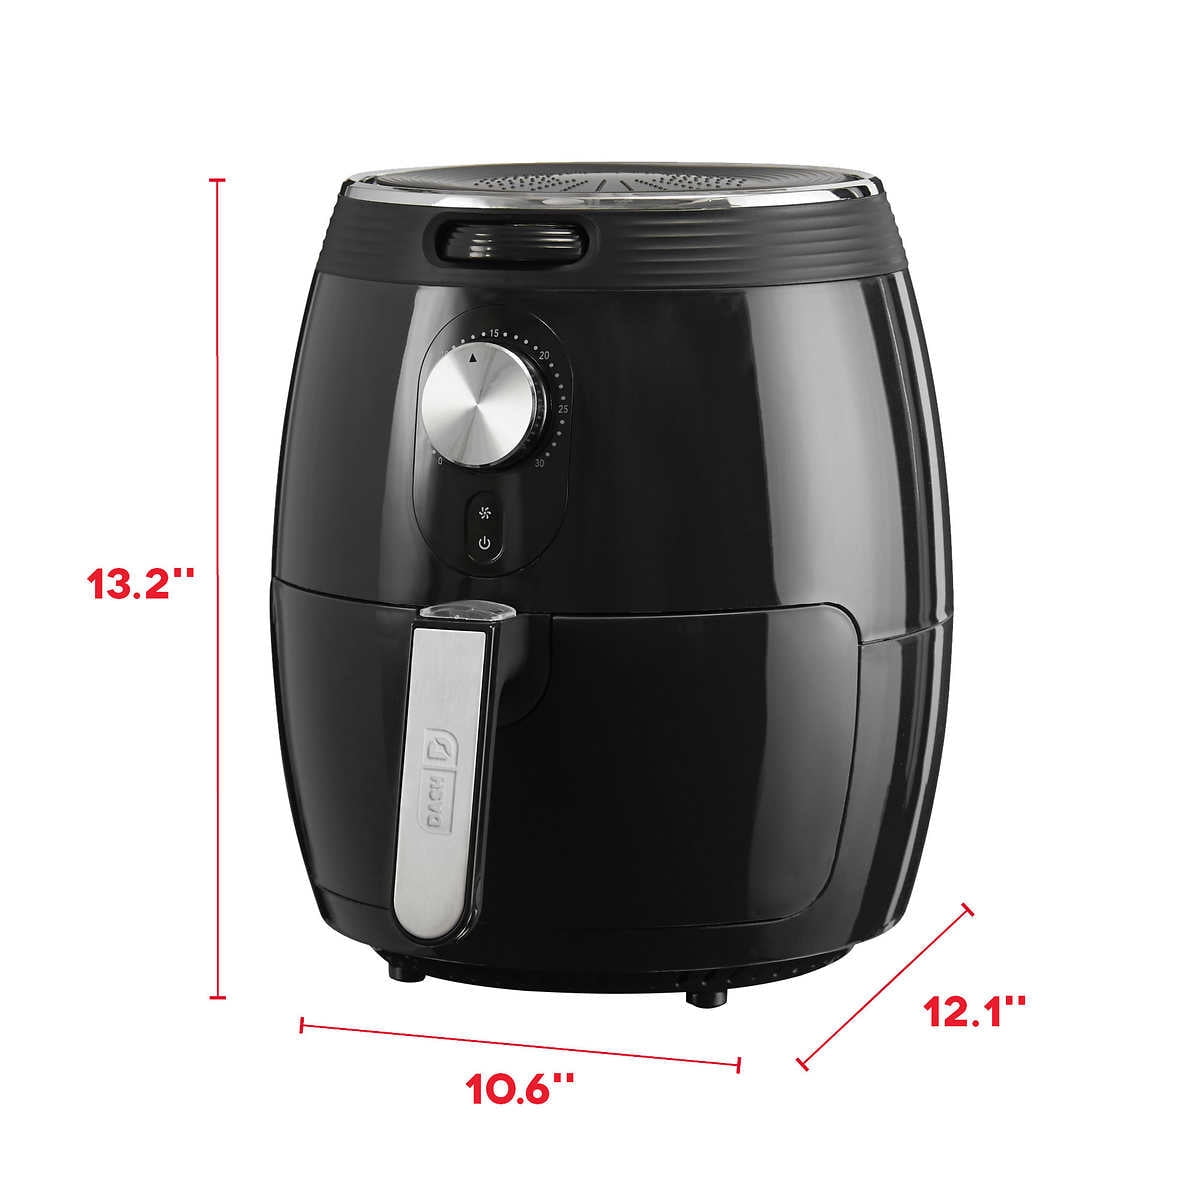 DASH Deluxe Electric Air Fryer + Oven Cooker with Temperature